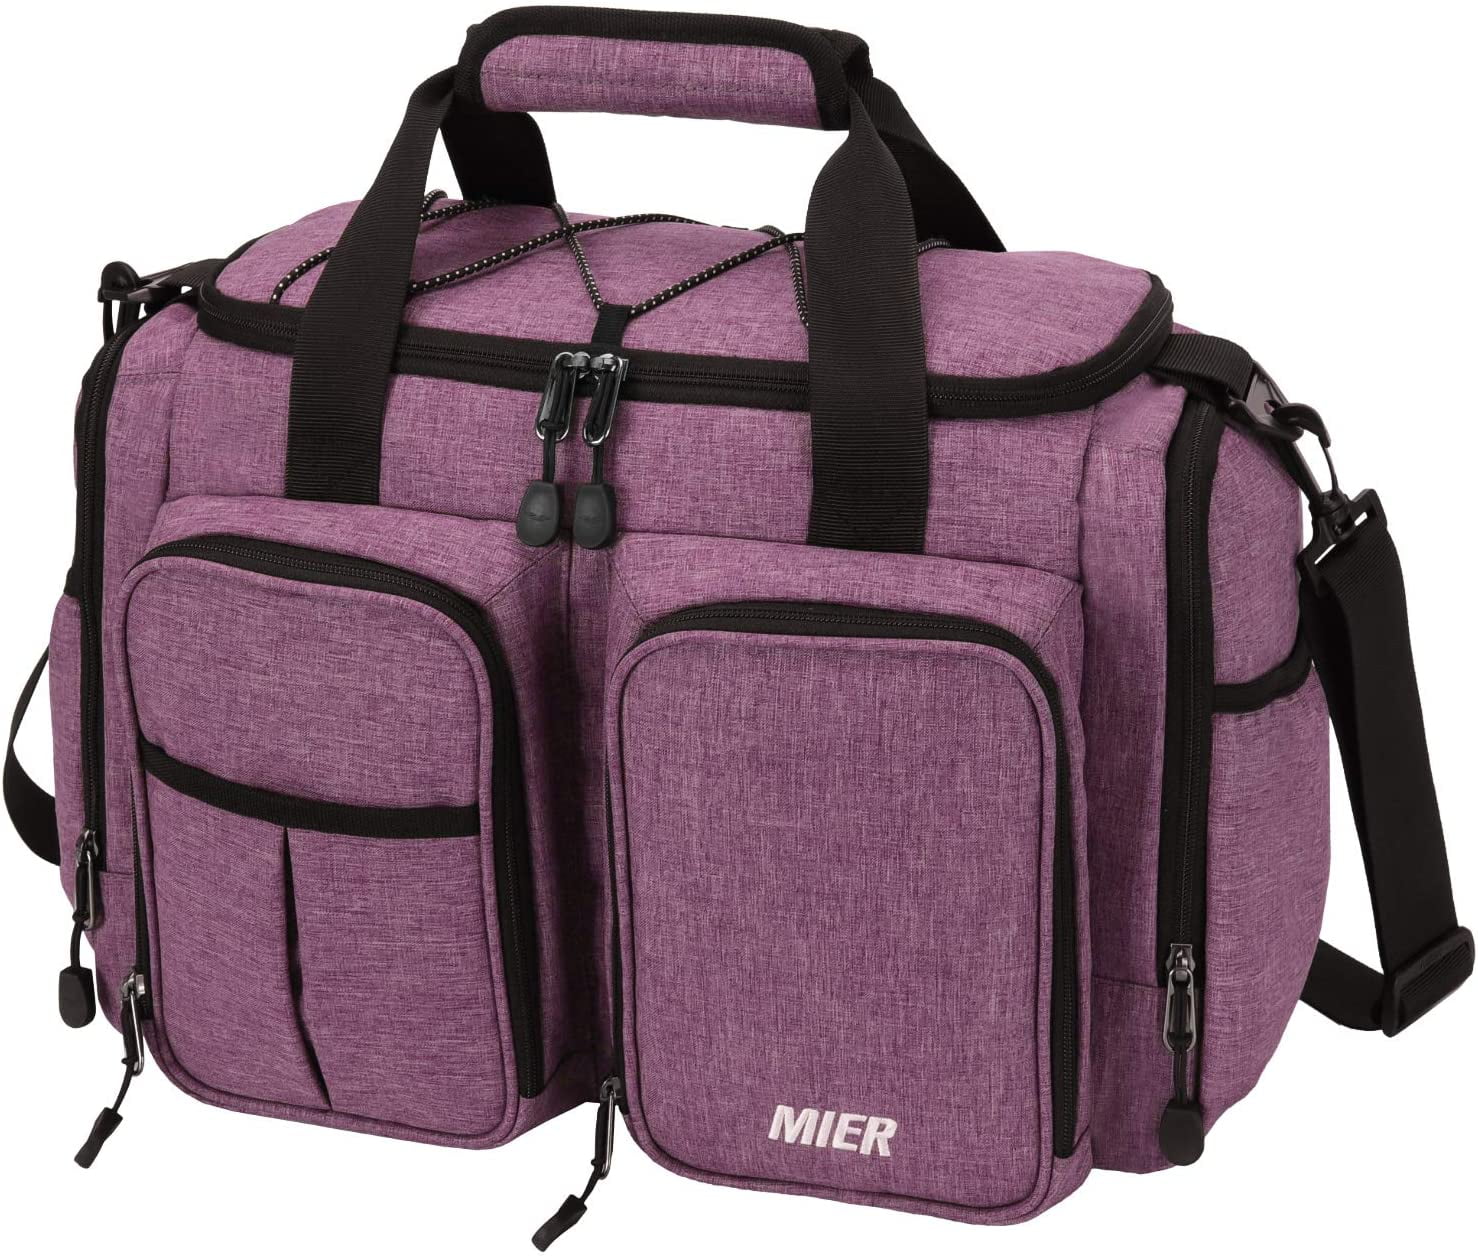 MIER Large Insulated Lunch Bag for Men 